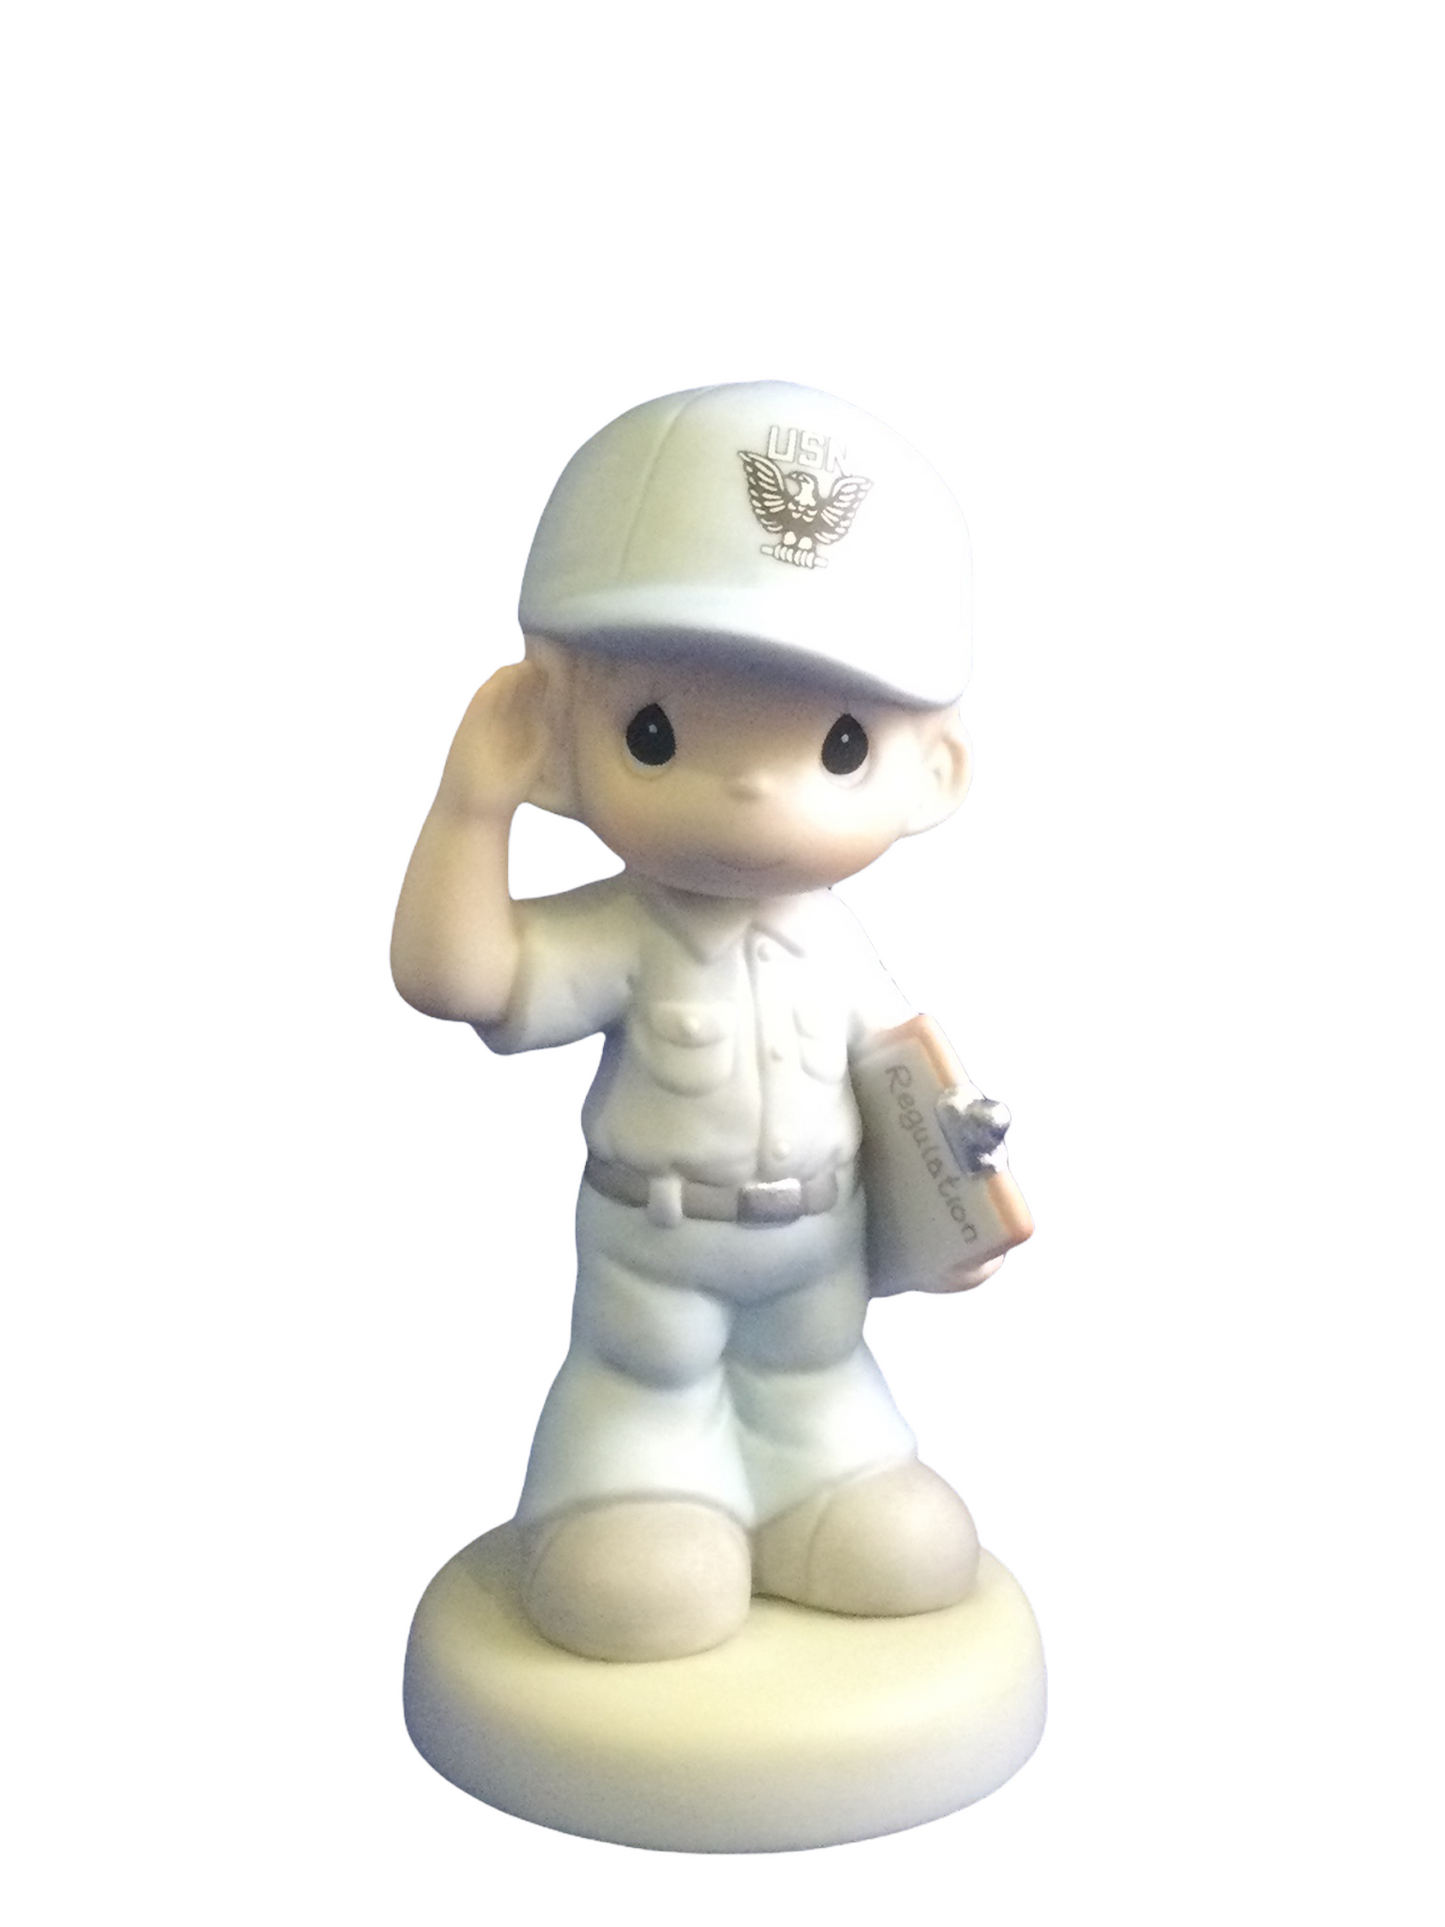 I'm Proud To Be An American  - Navy - Precious Moment Figurine